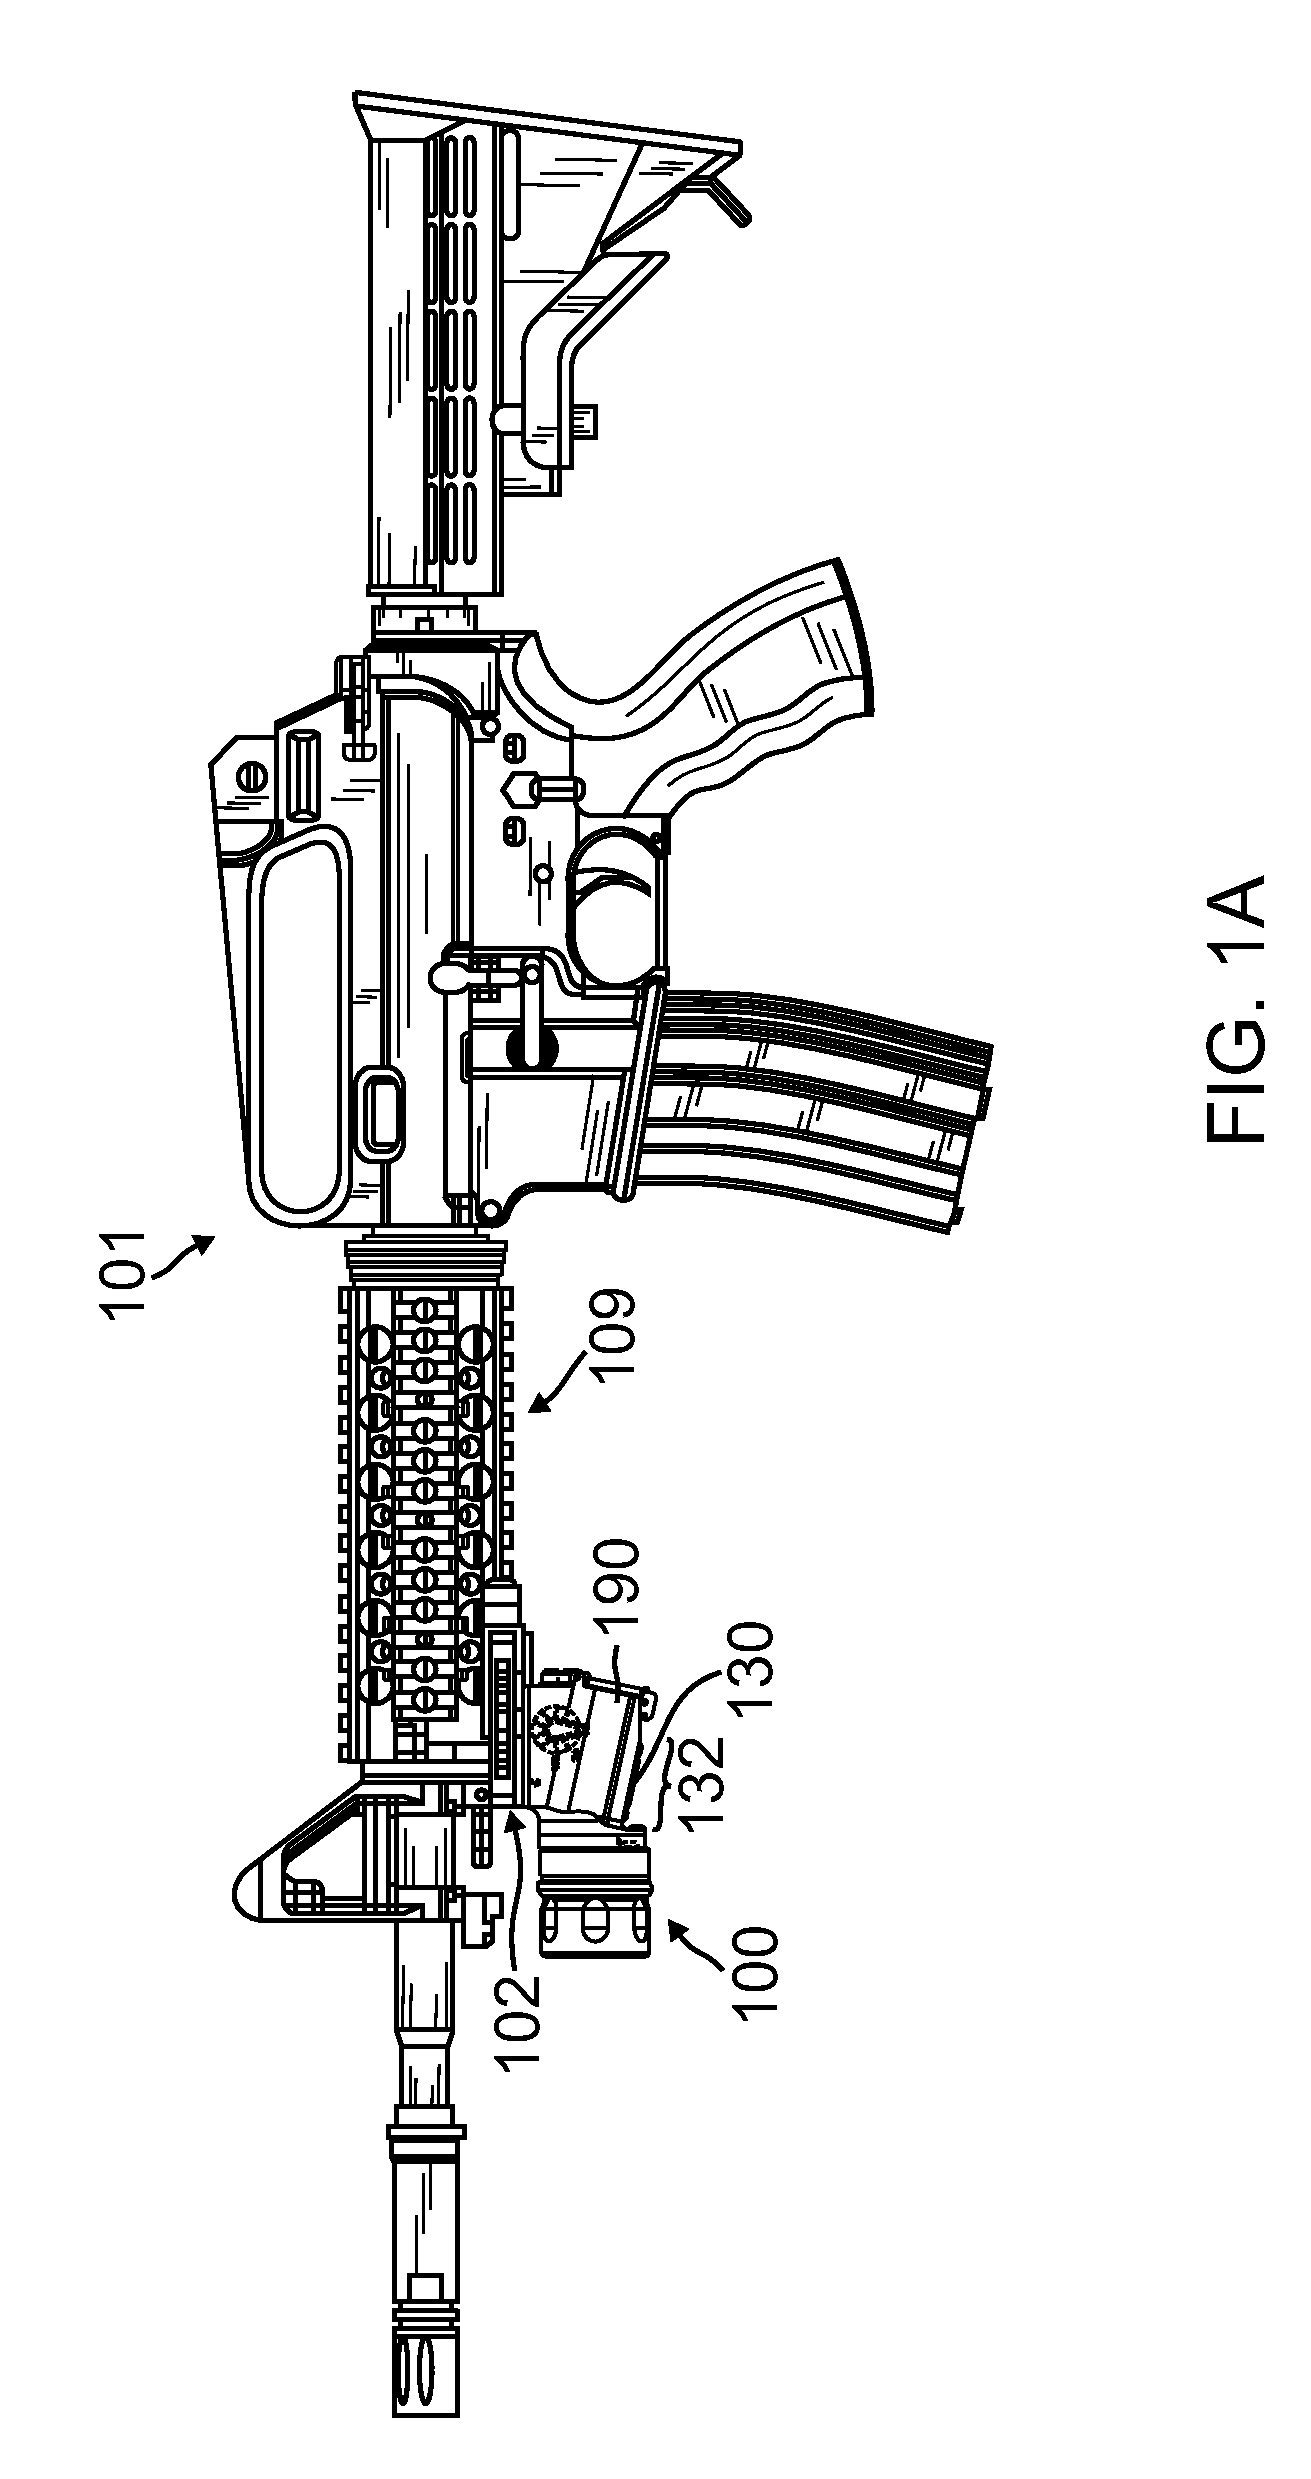 Lighting device with switchable light sources